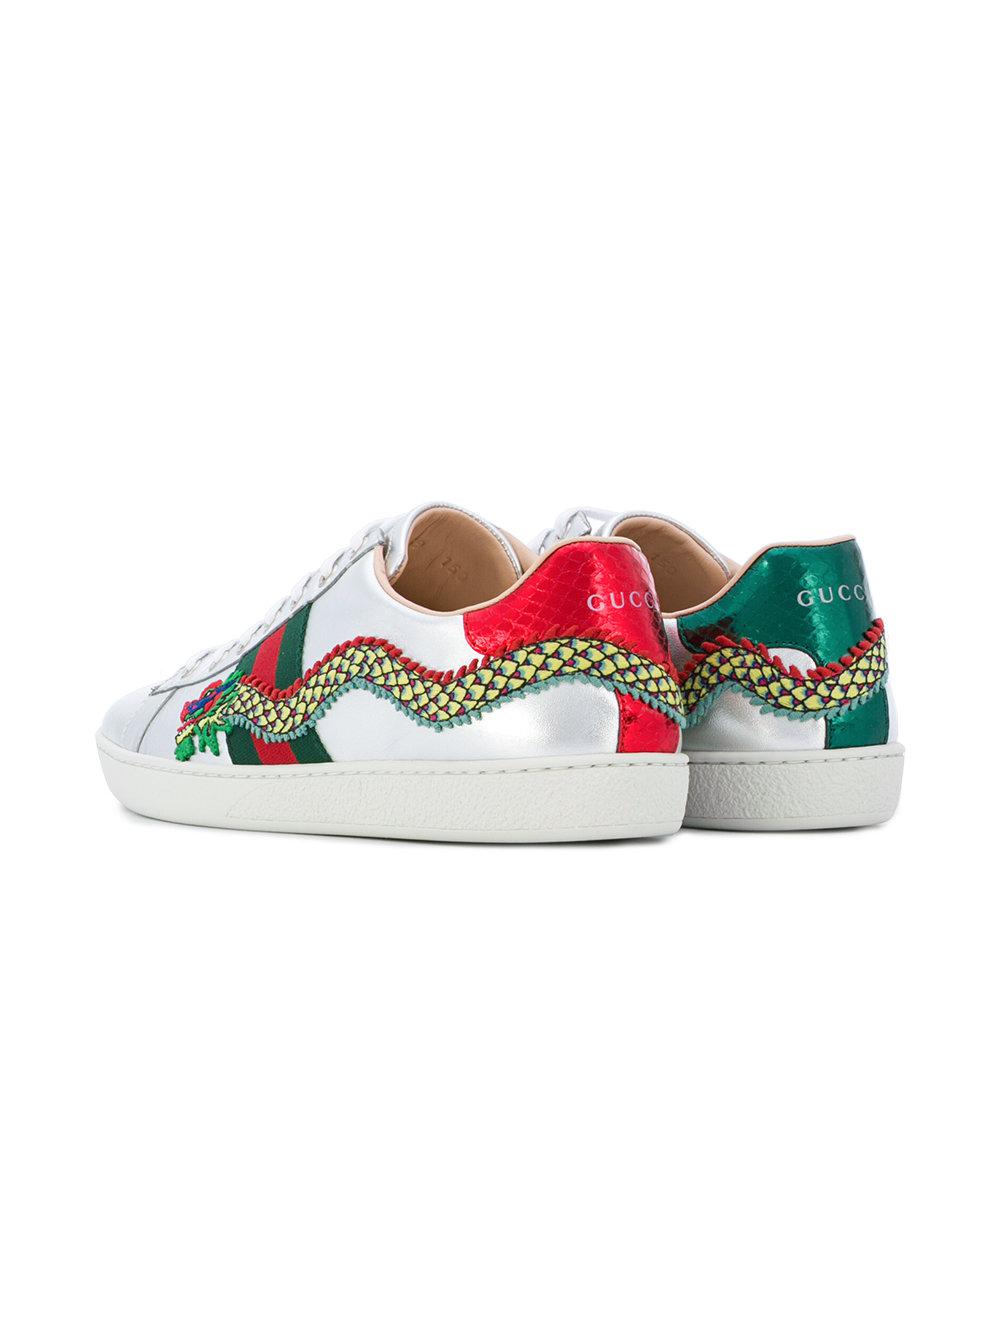 Ace Embroidered Sneakers in Metallic - Lyst